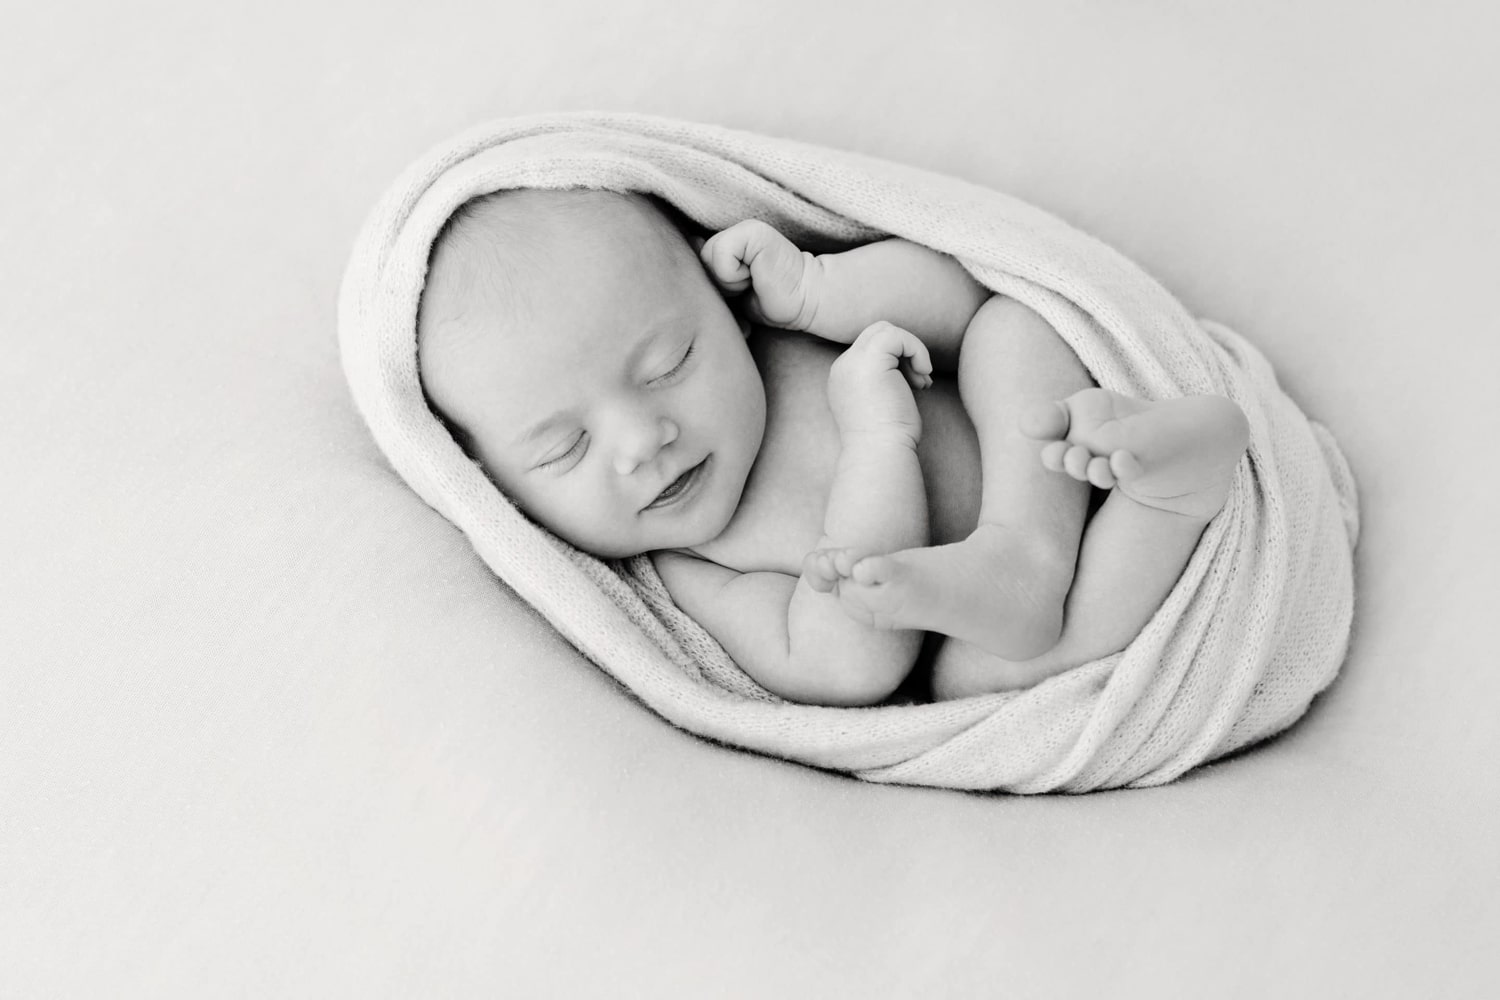 A newborn baby wrapped in a swaddle.